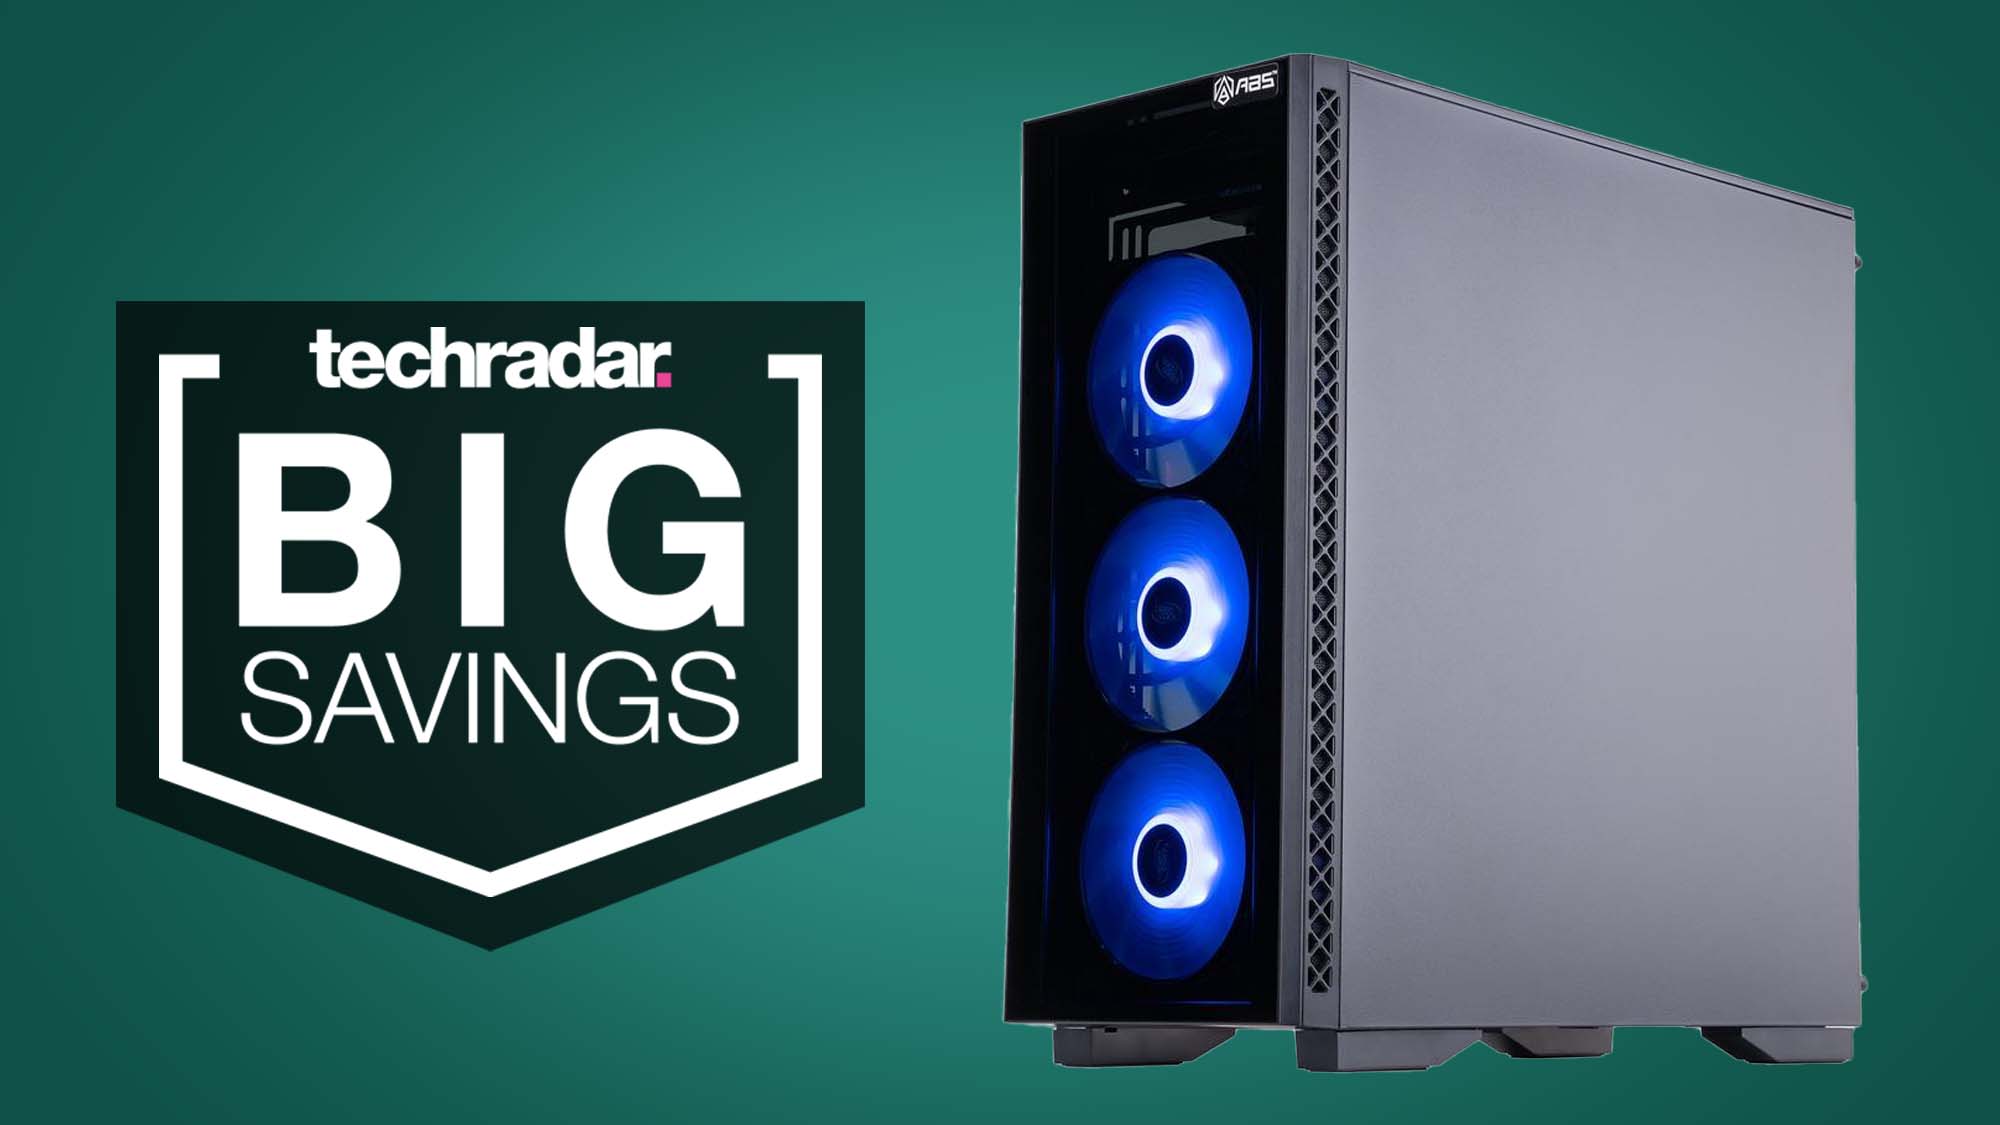 This RTX 3080 Ti gaming PC is $700 off with this early Black Friday deal from Newegg